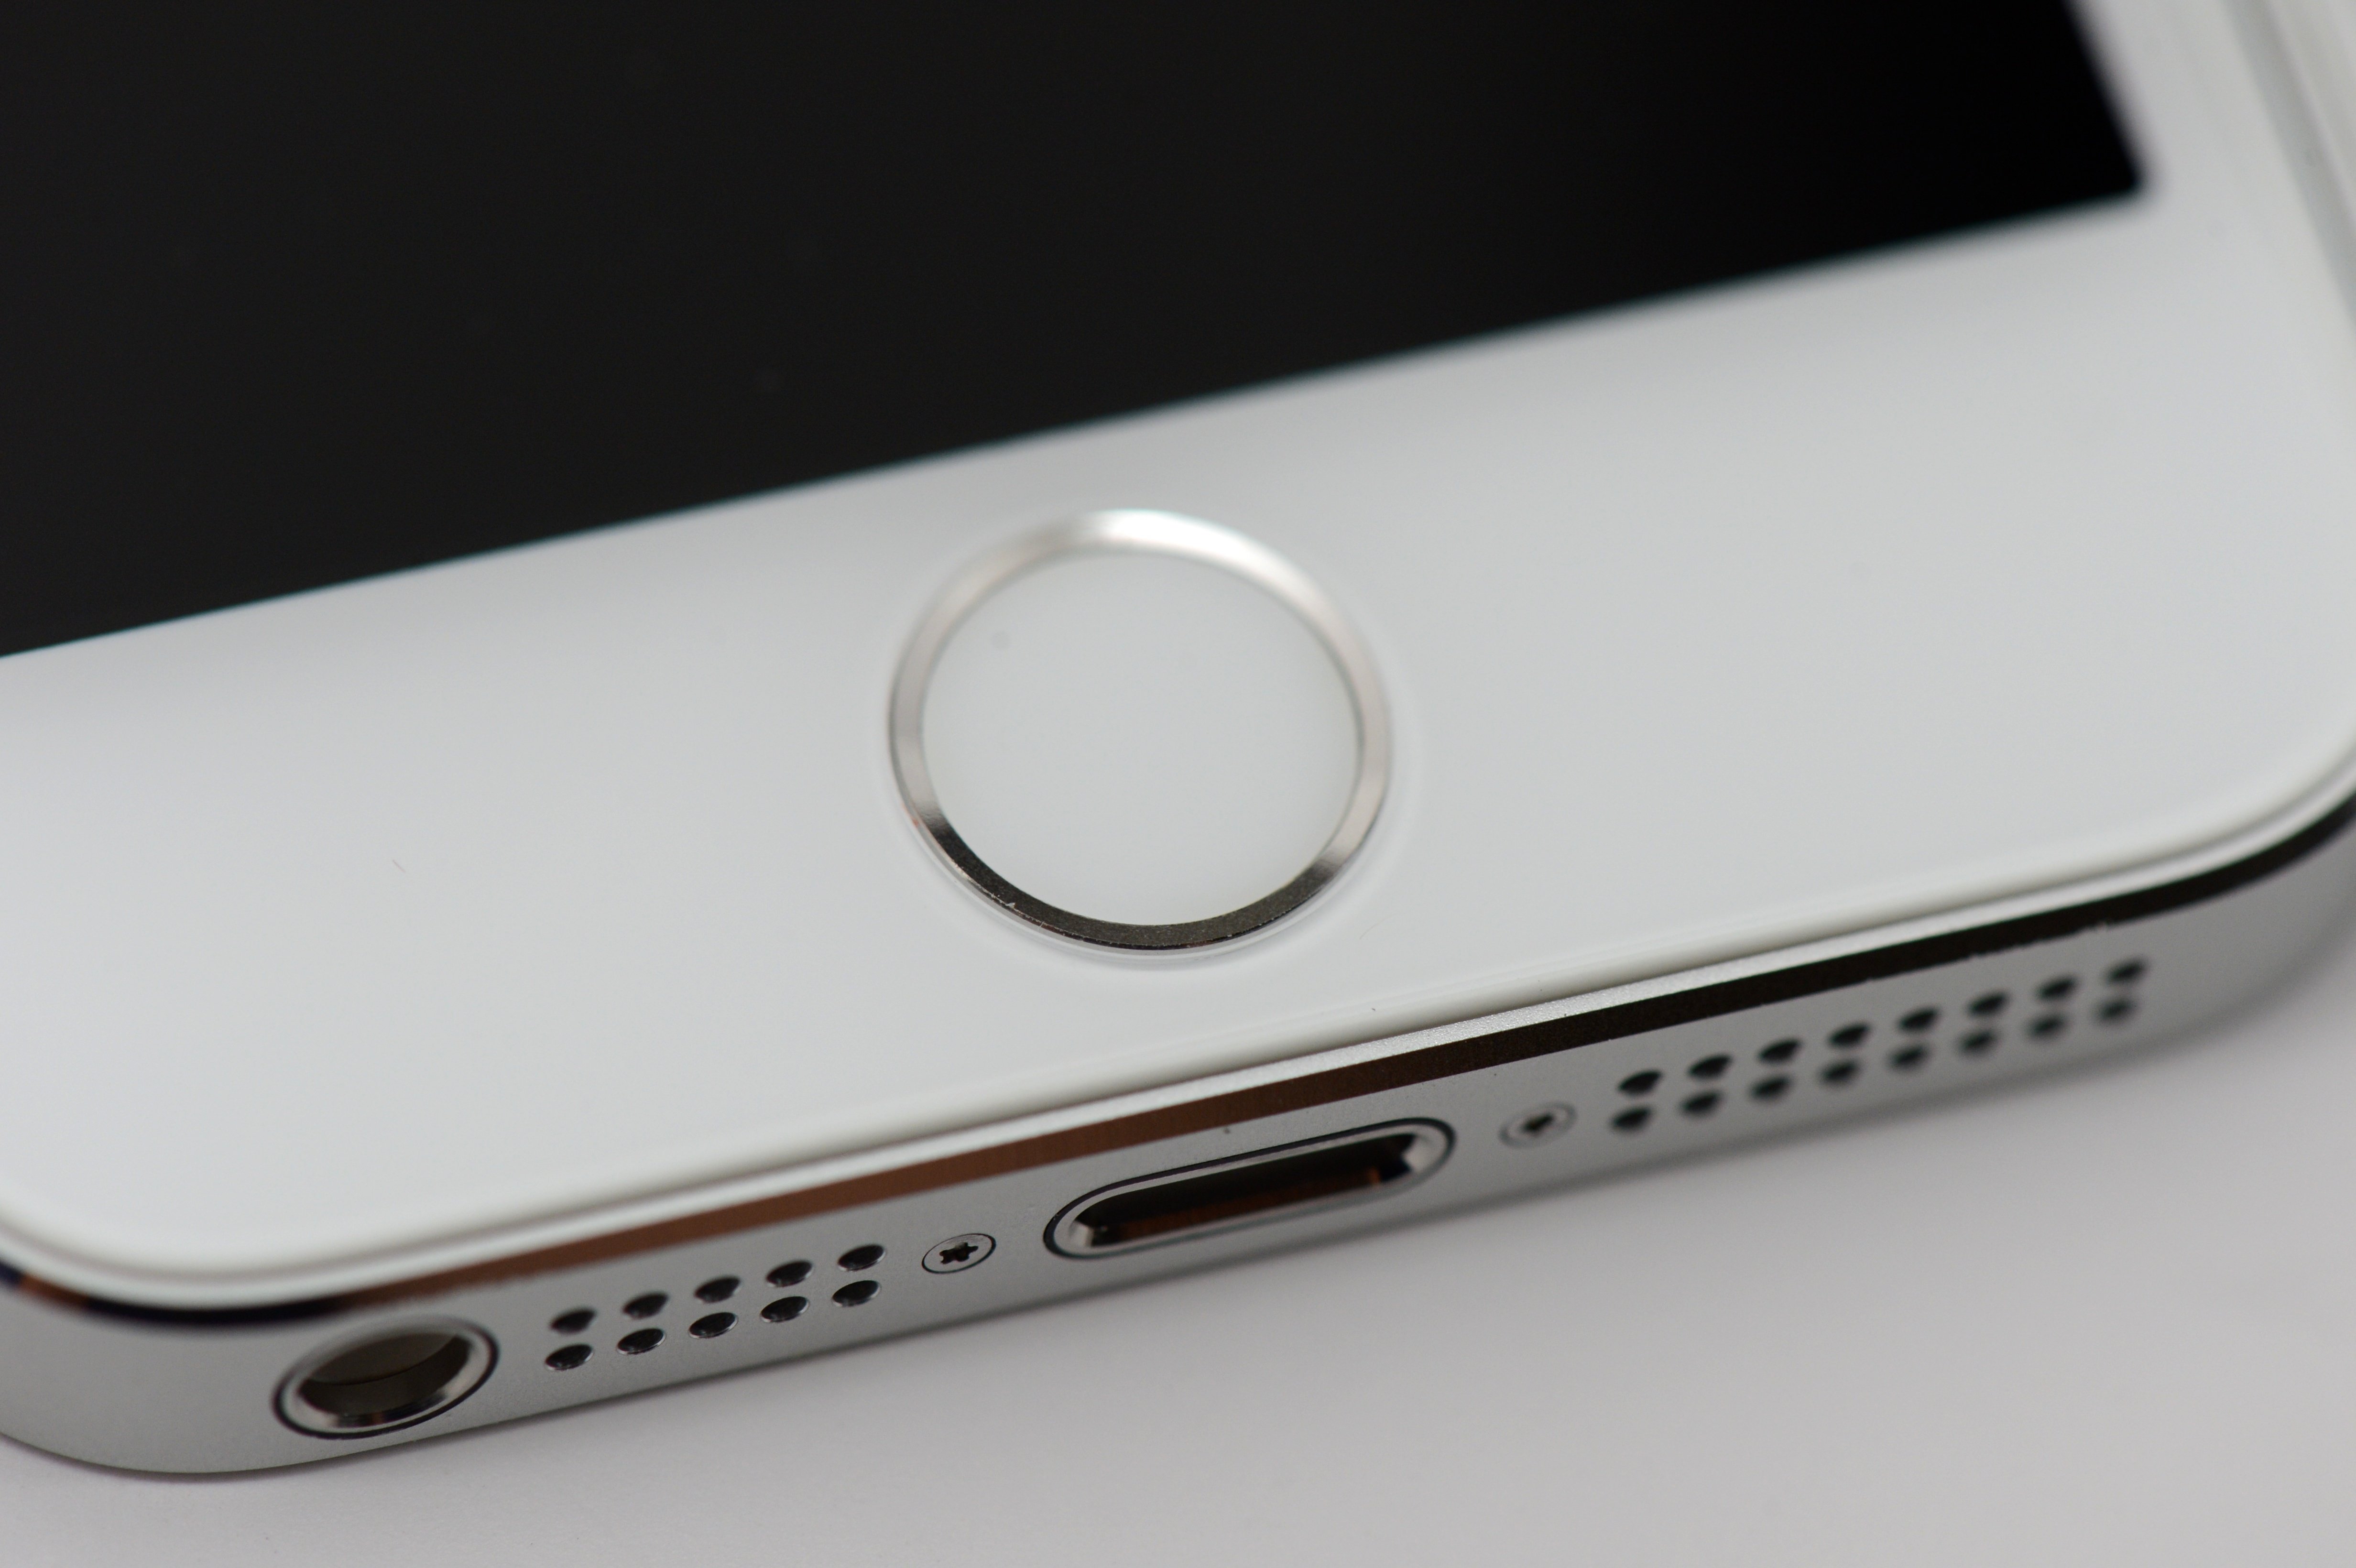 The first iPhone 5s ad showcases Touch ID.